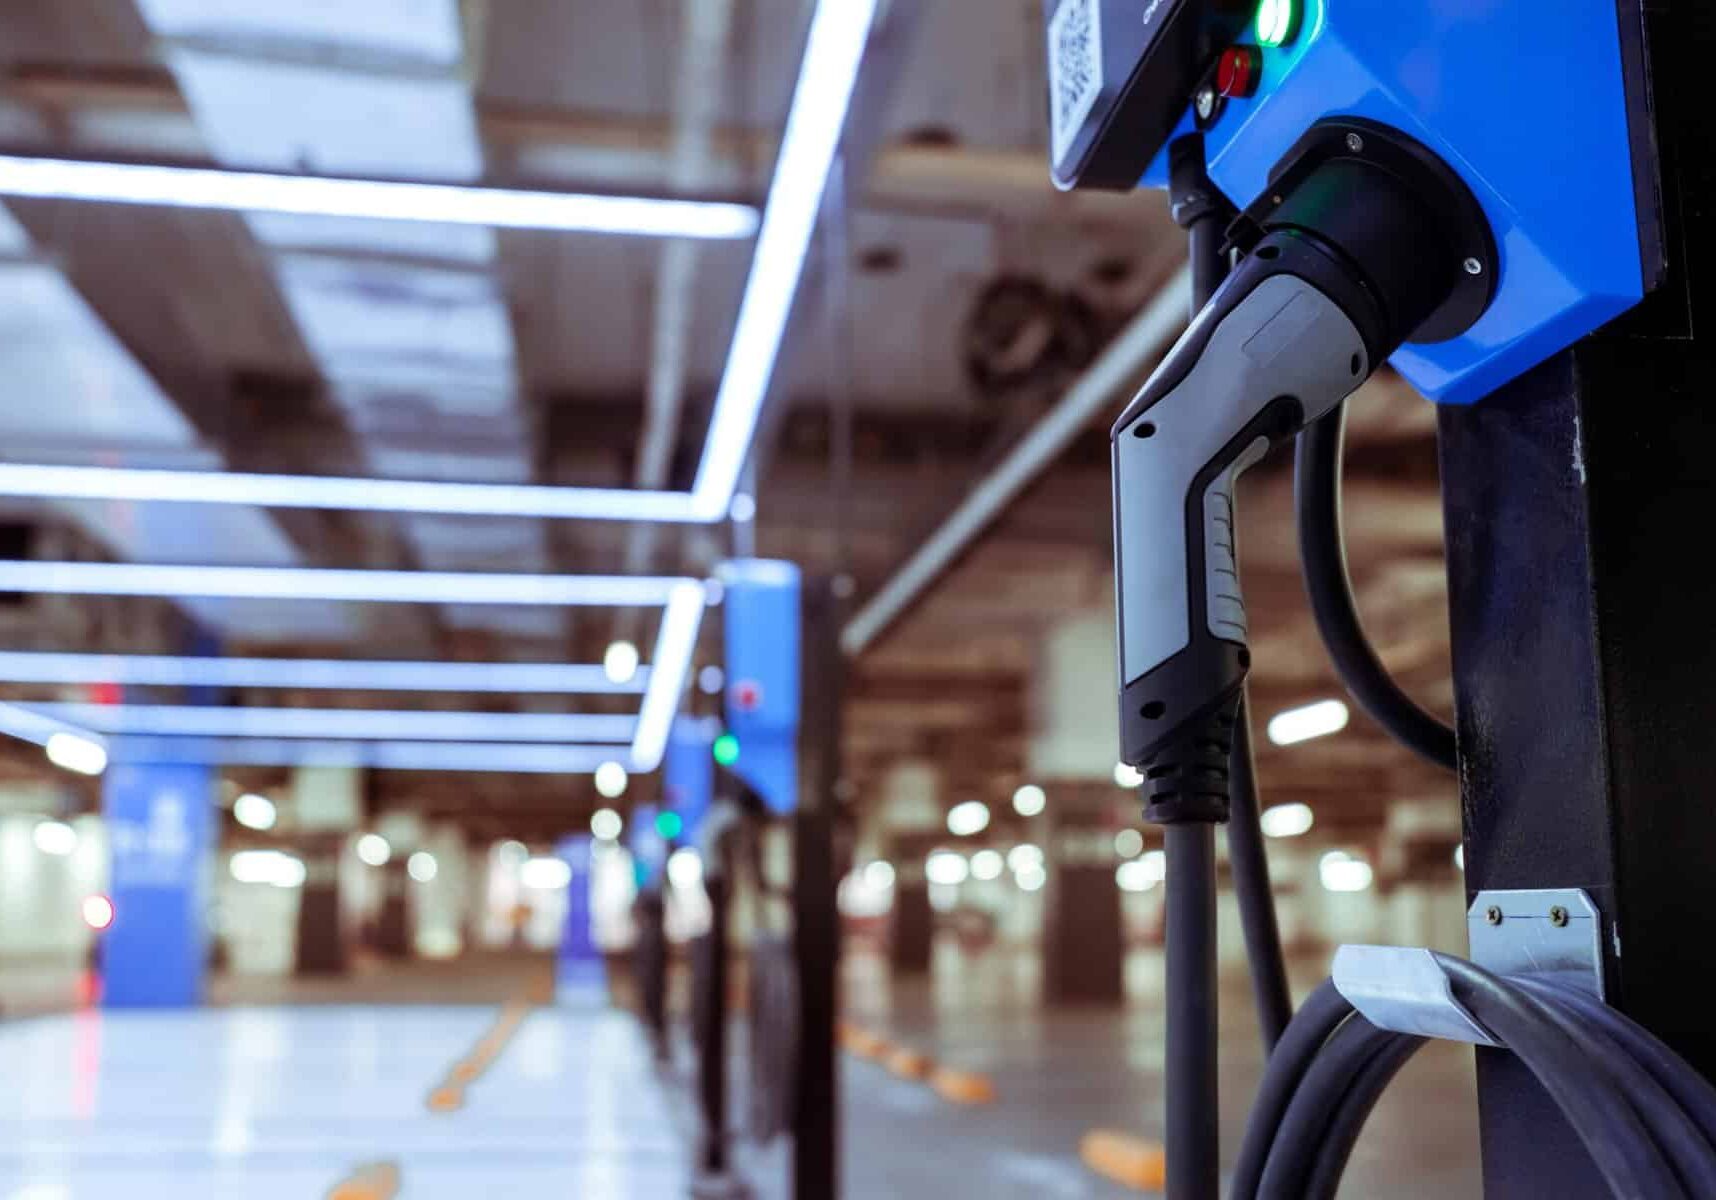 An electric car charging station in a parking garage offering convenient charging for GOEVIN vehicles.